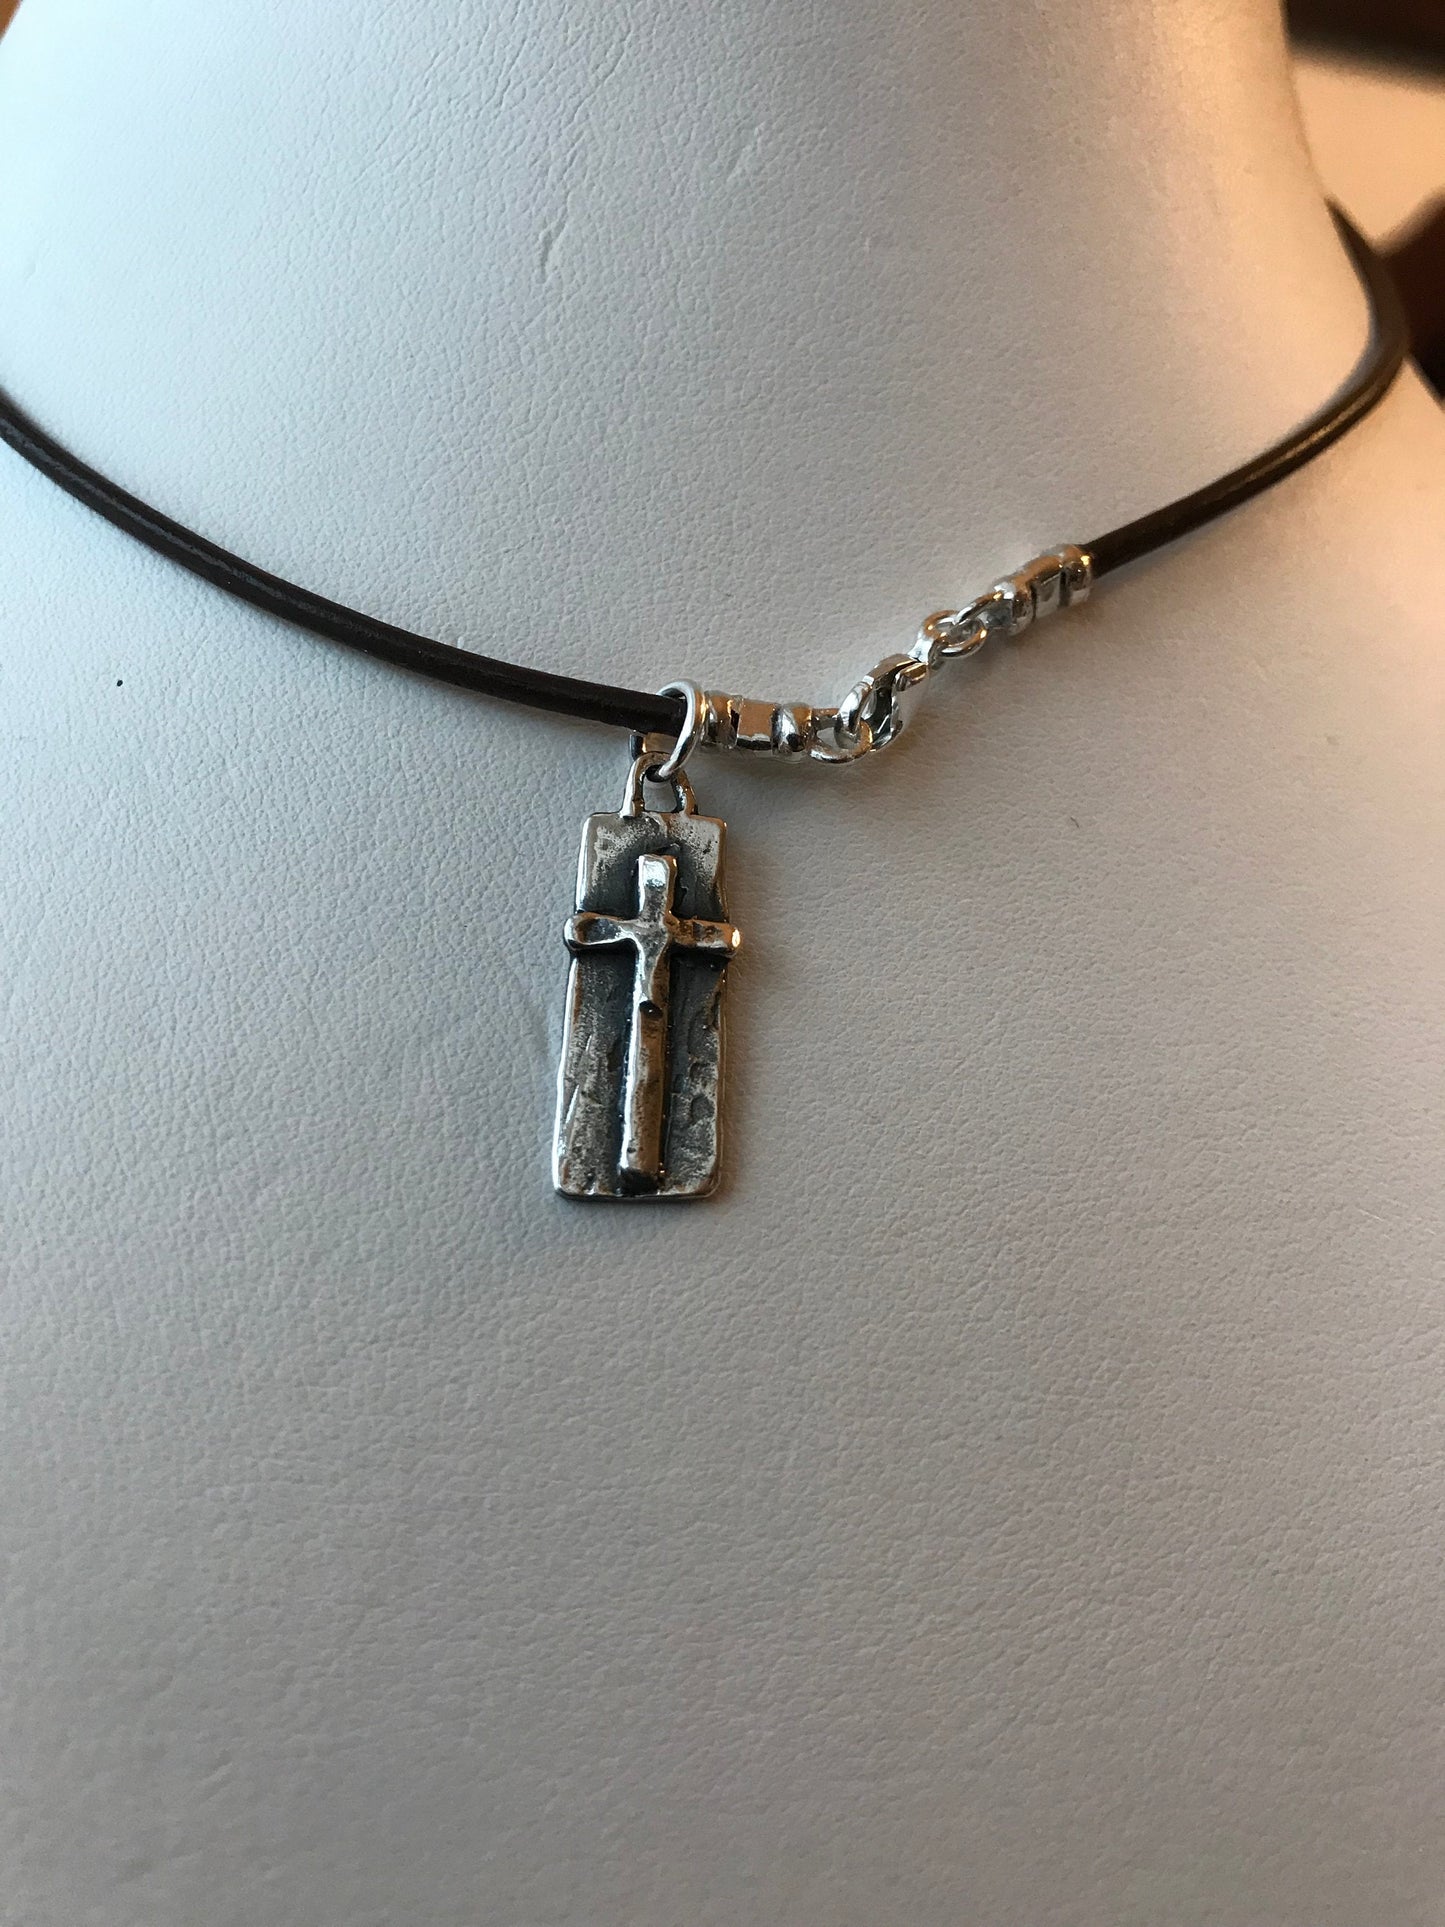 Silver Leather Cord Rectangle Cross Boy Necklace,First Communion Boy Necklace Gift,Confirmation Boy Necklace,Baptism Necklace,Cross Necklace